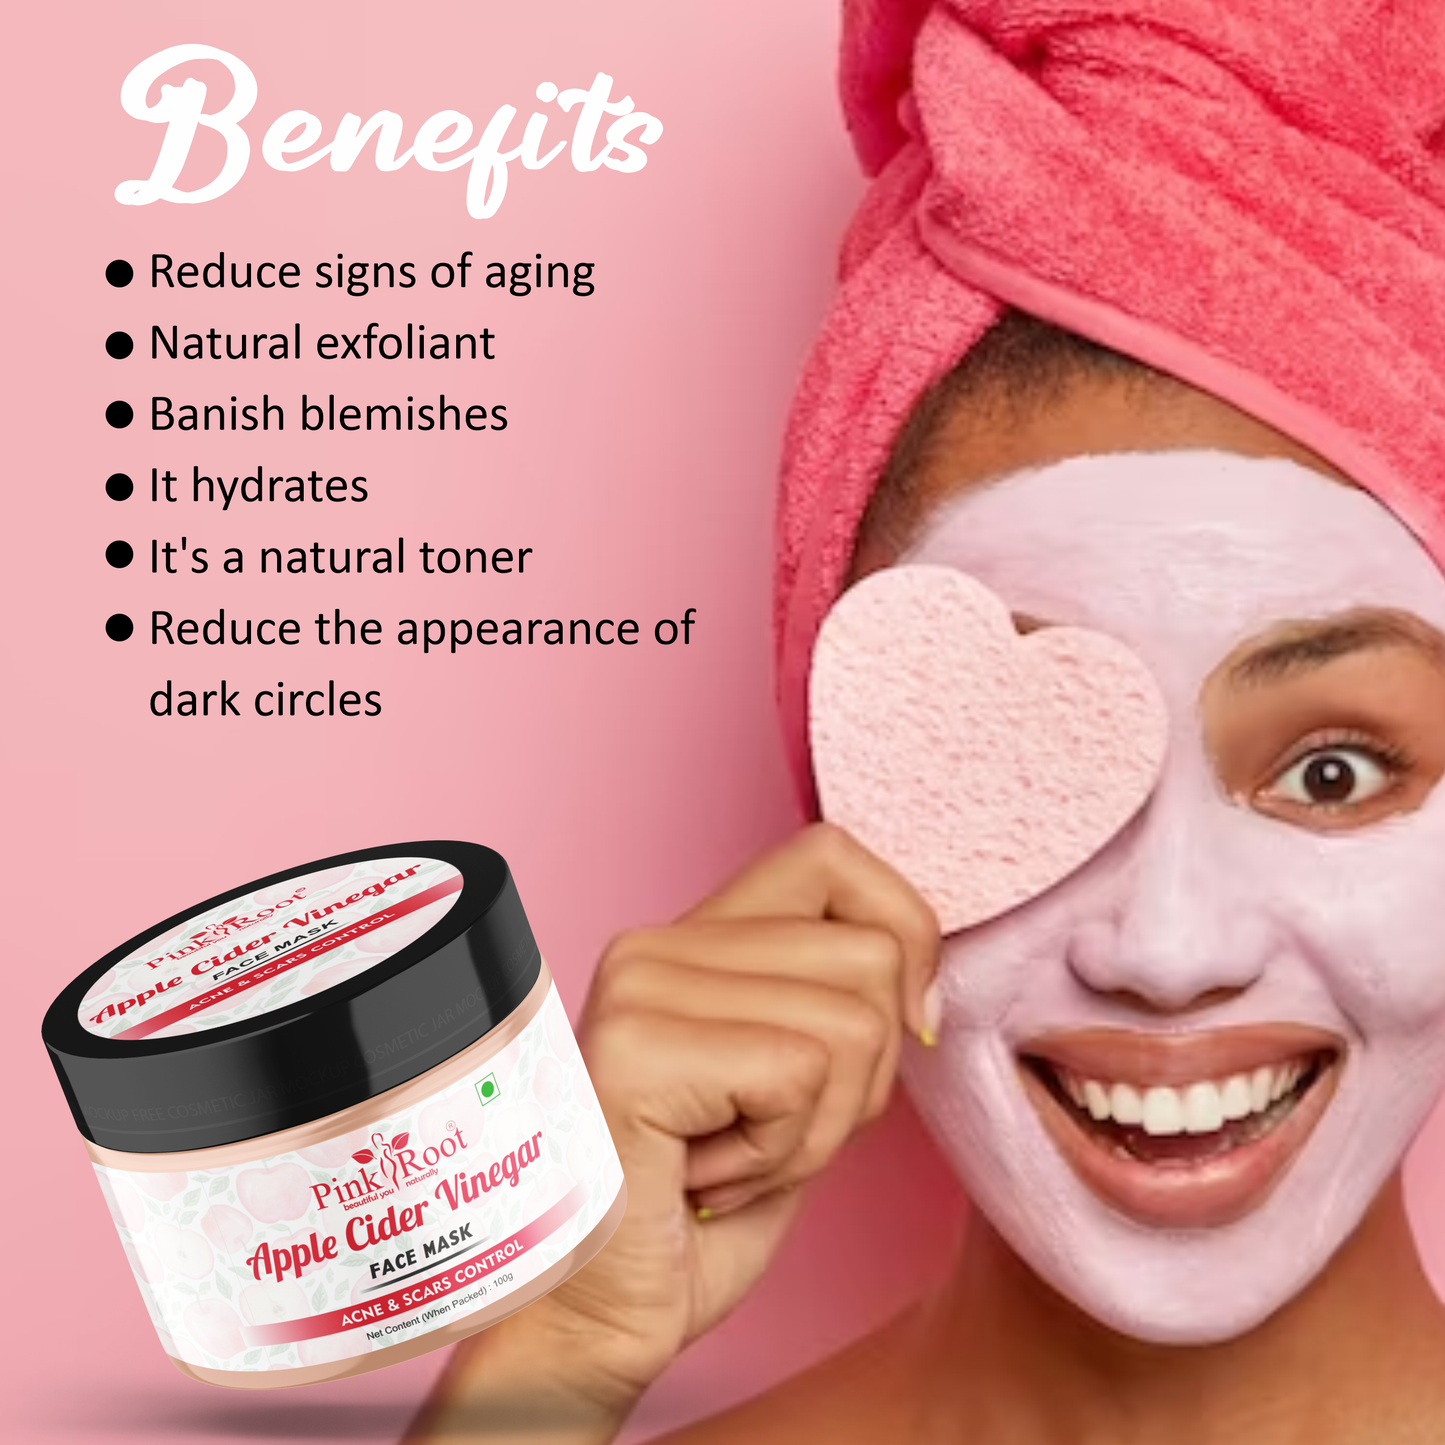 Pink Root Red Apple Facial Kit for Men & Women, gives antioxidants to skin, reduces skin damage & gives flawless brighter skin